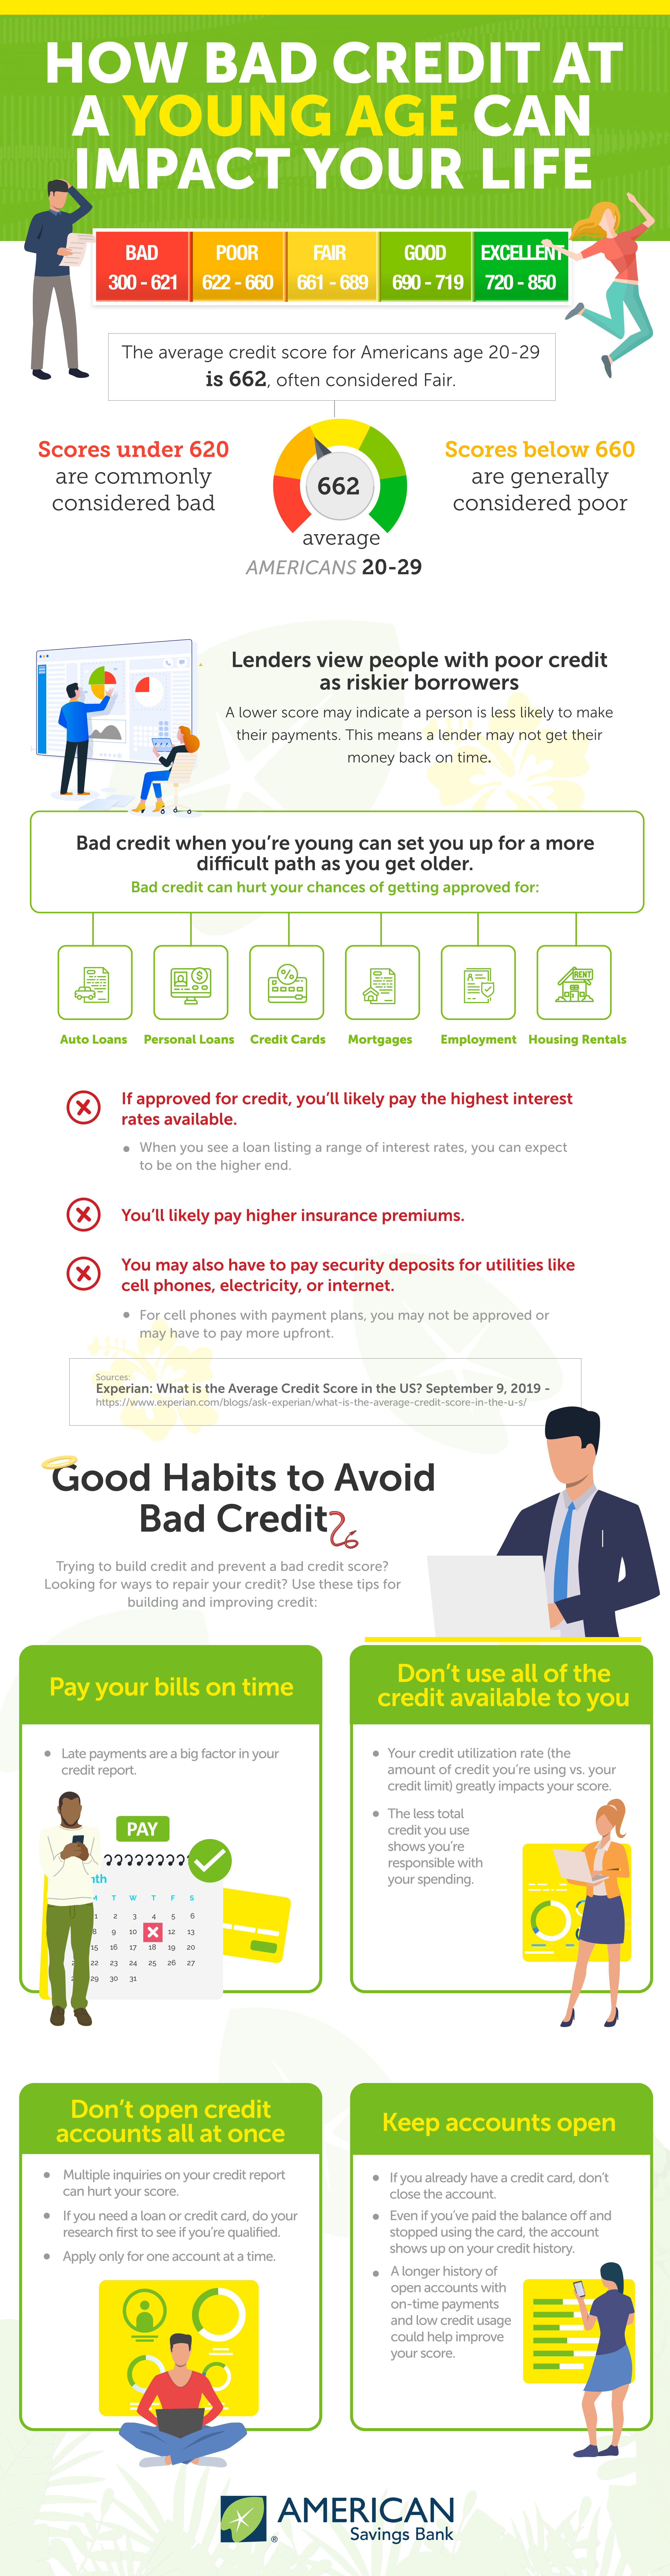 how credit at a young age can impact your life